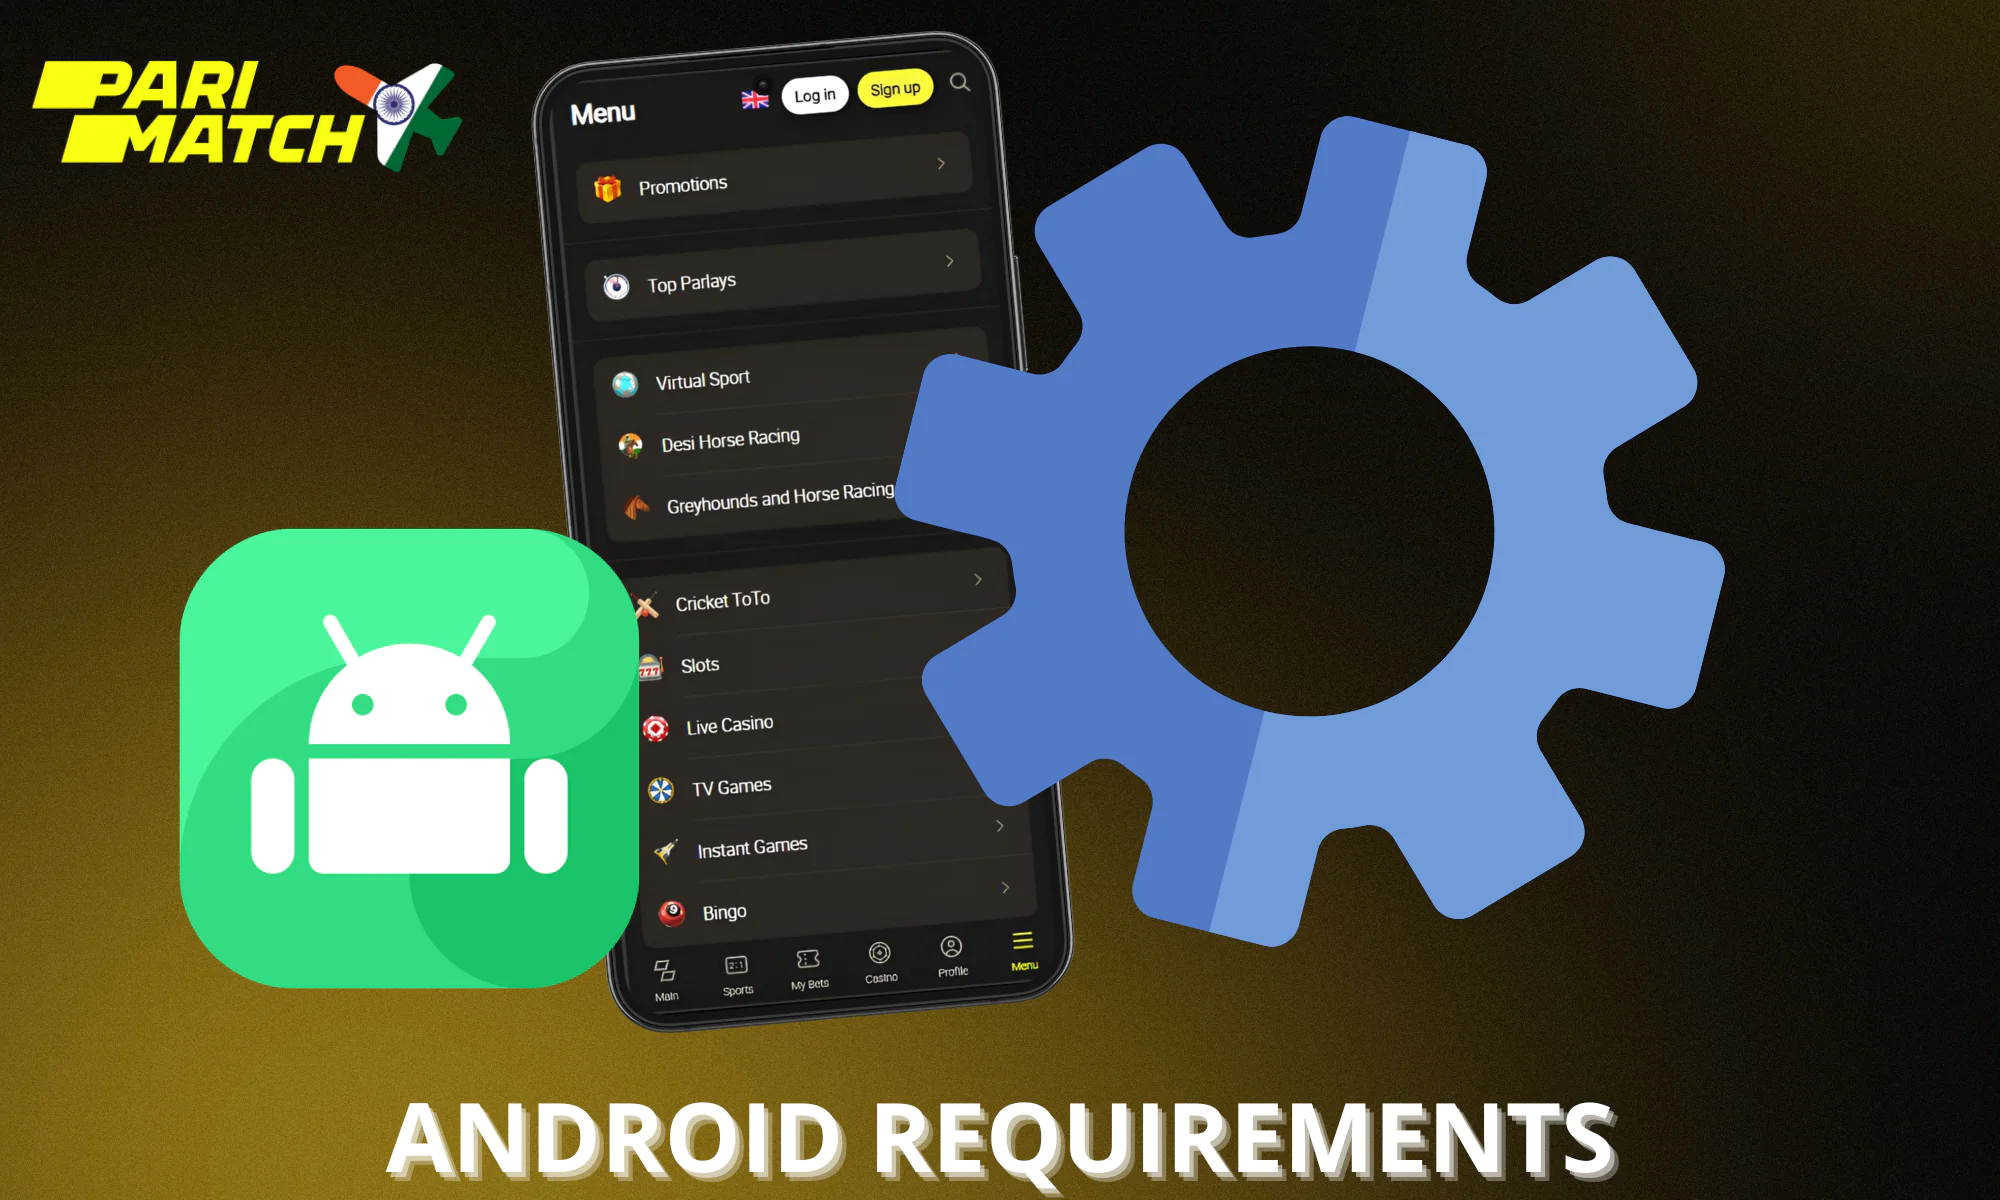 System requirements for Android devices for the Parimatch app to work correctly